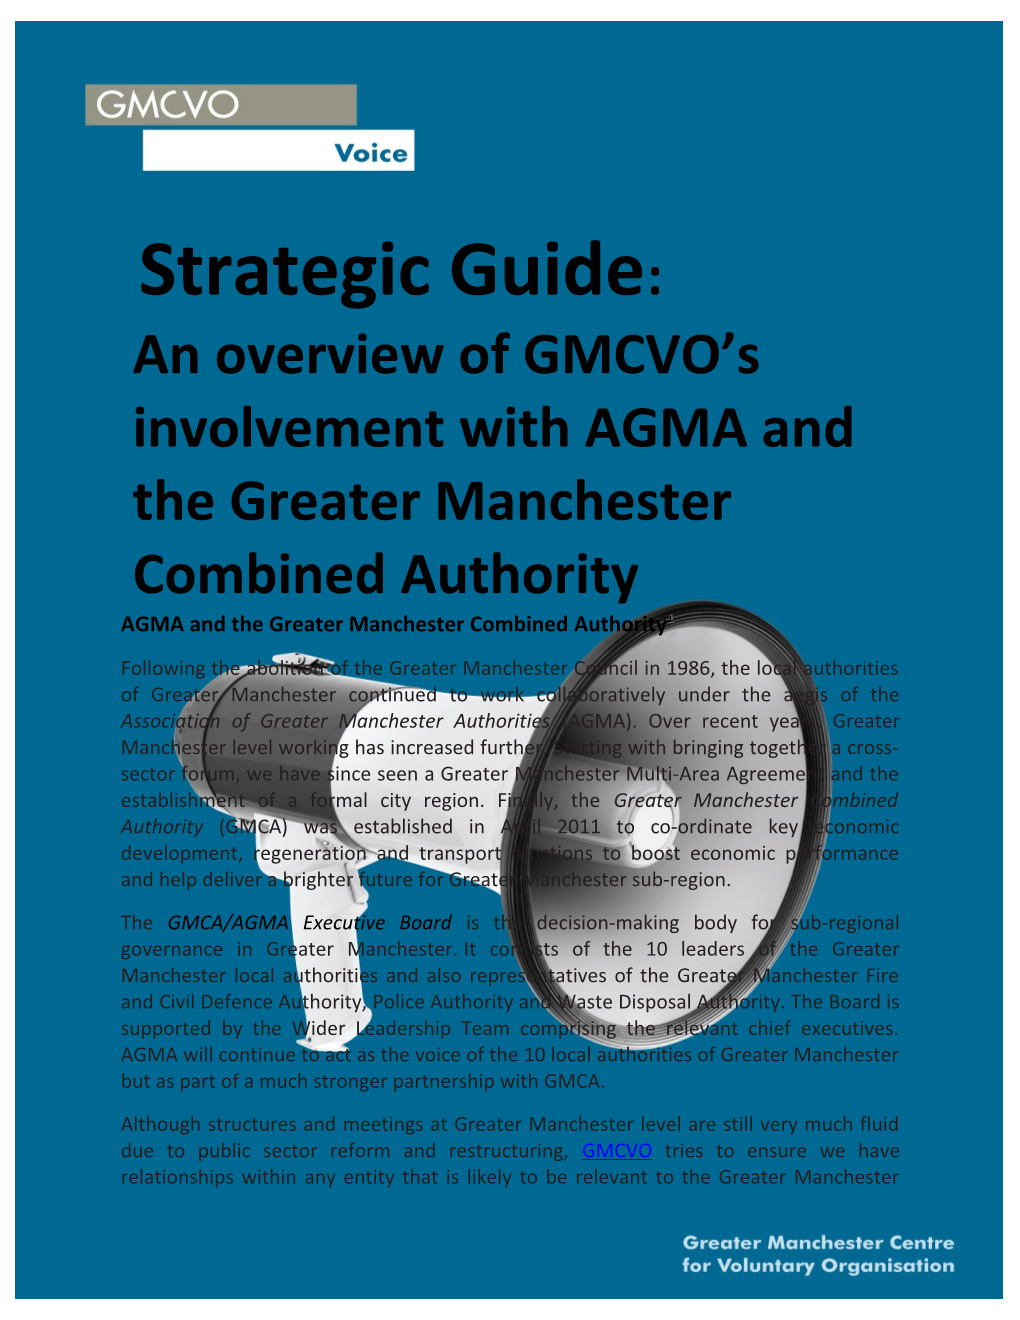 AGMA and the Greater Manchester Combined Authority 1